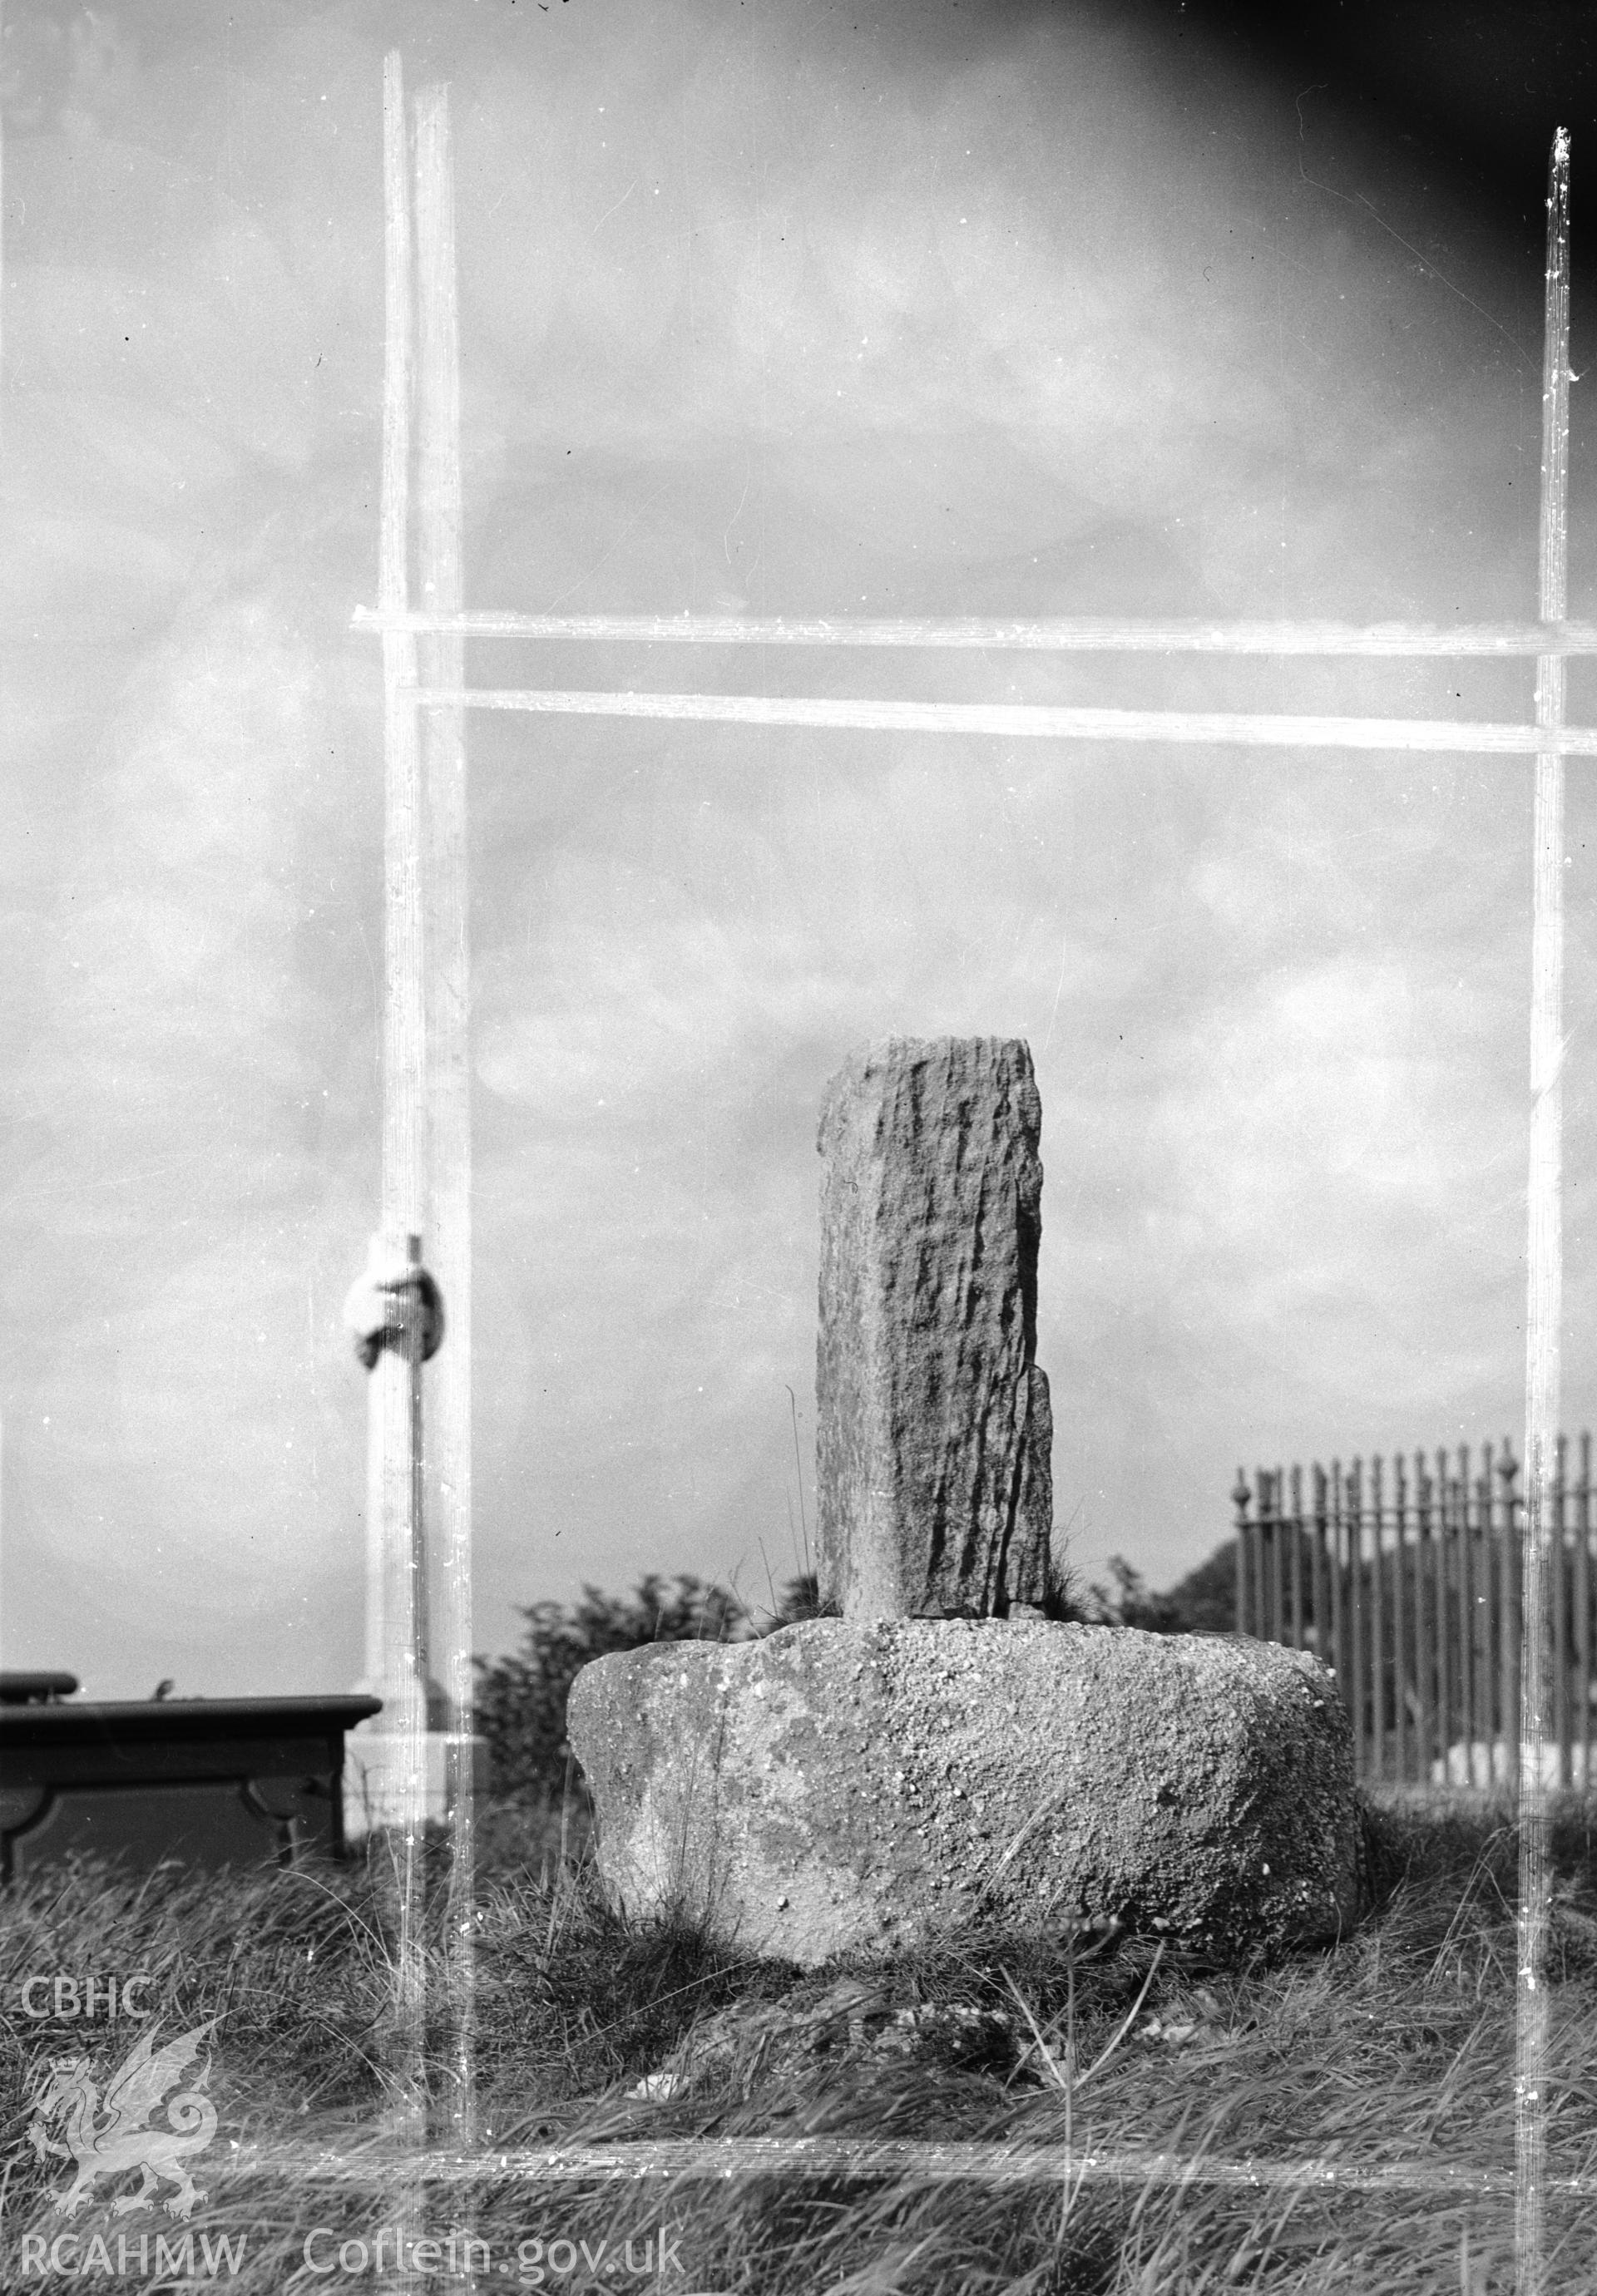 One black and white photograph showing the south face of t the crosss base in St Caffo's Churchyard.